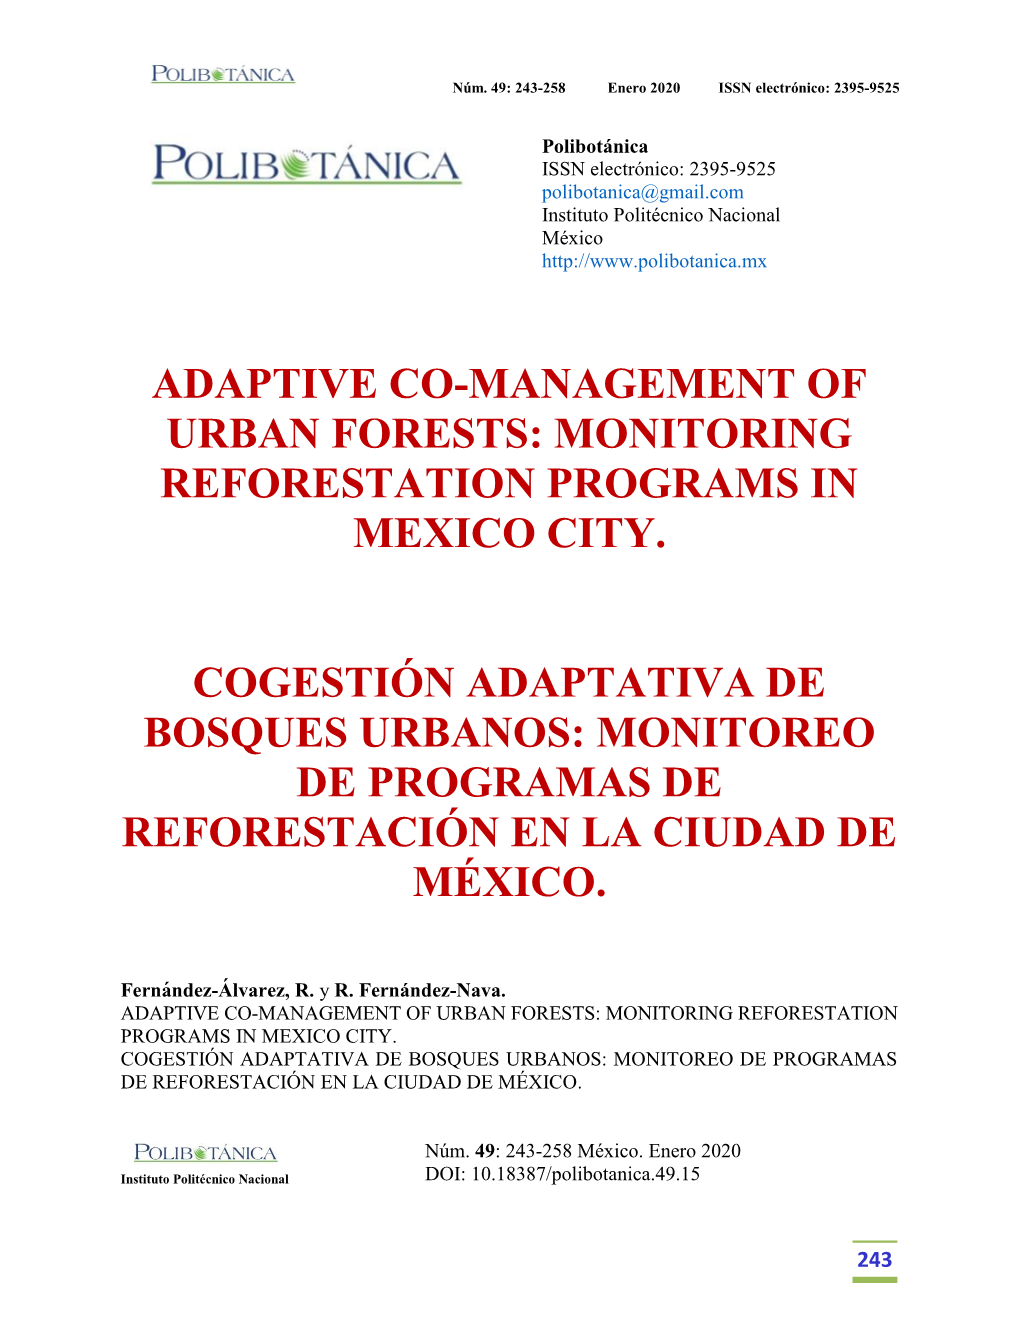 Adaptive Co-Management of Urban Forests: Monitoring Reforestation Programs in Mexico City